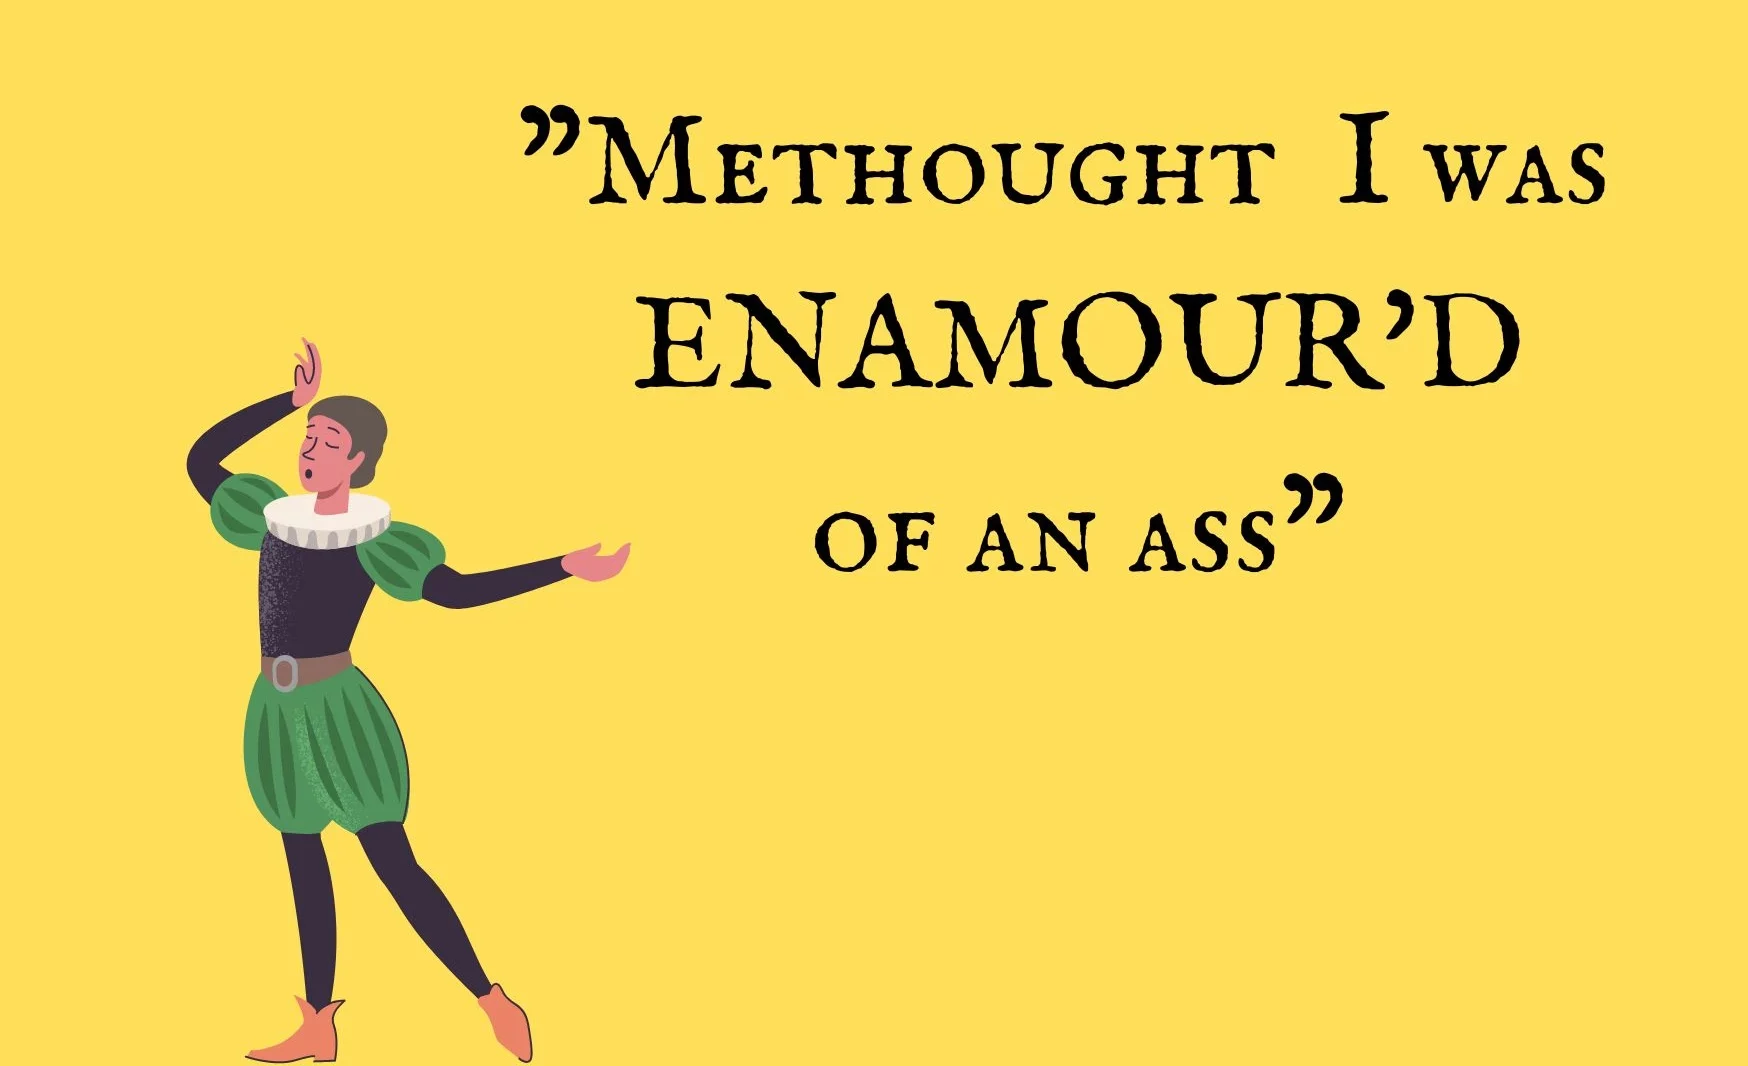 A graphic of a Shakespearian actor with the quote: "methought I was enamour'd of an ass" from Midsummer Night's Dream